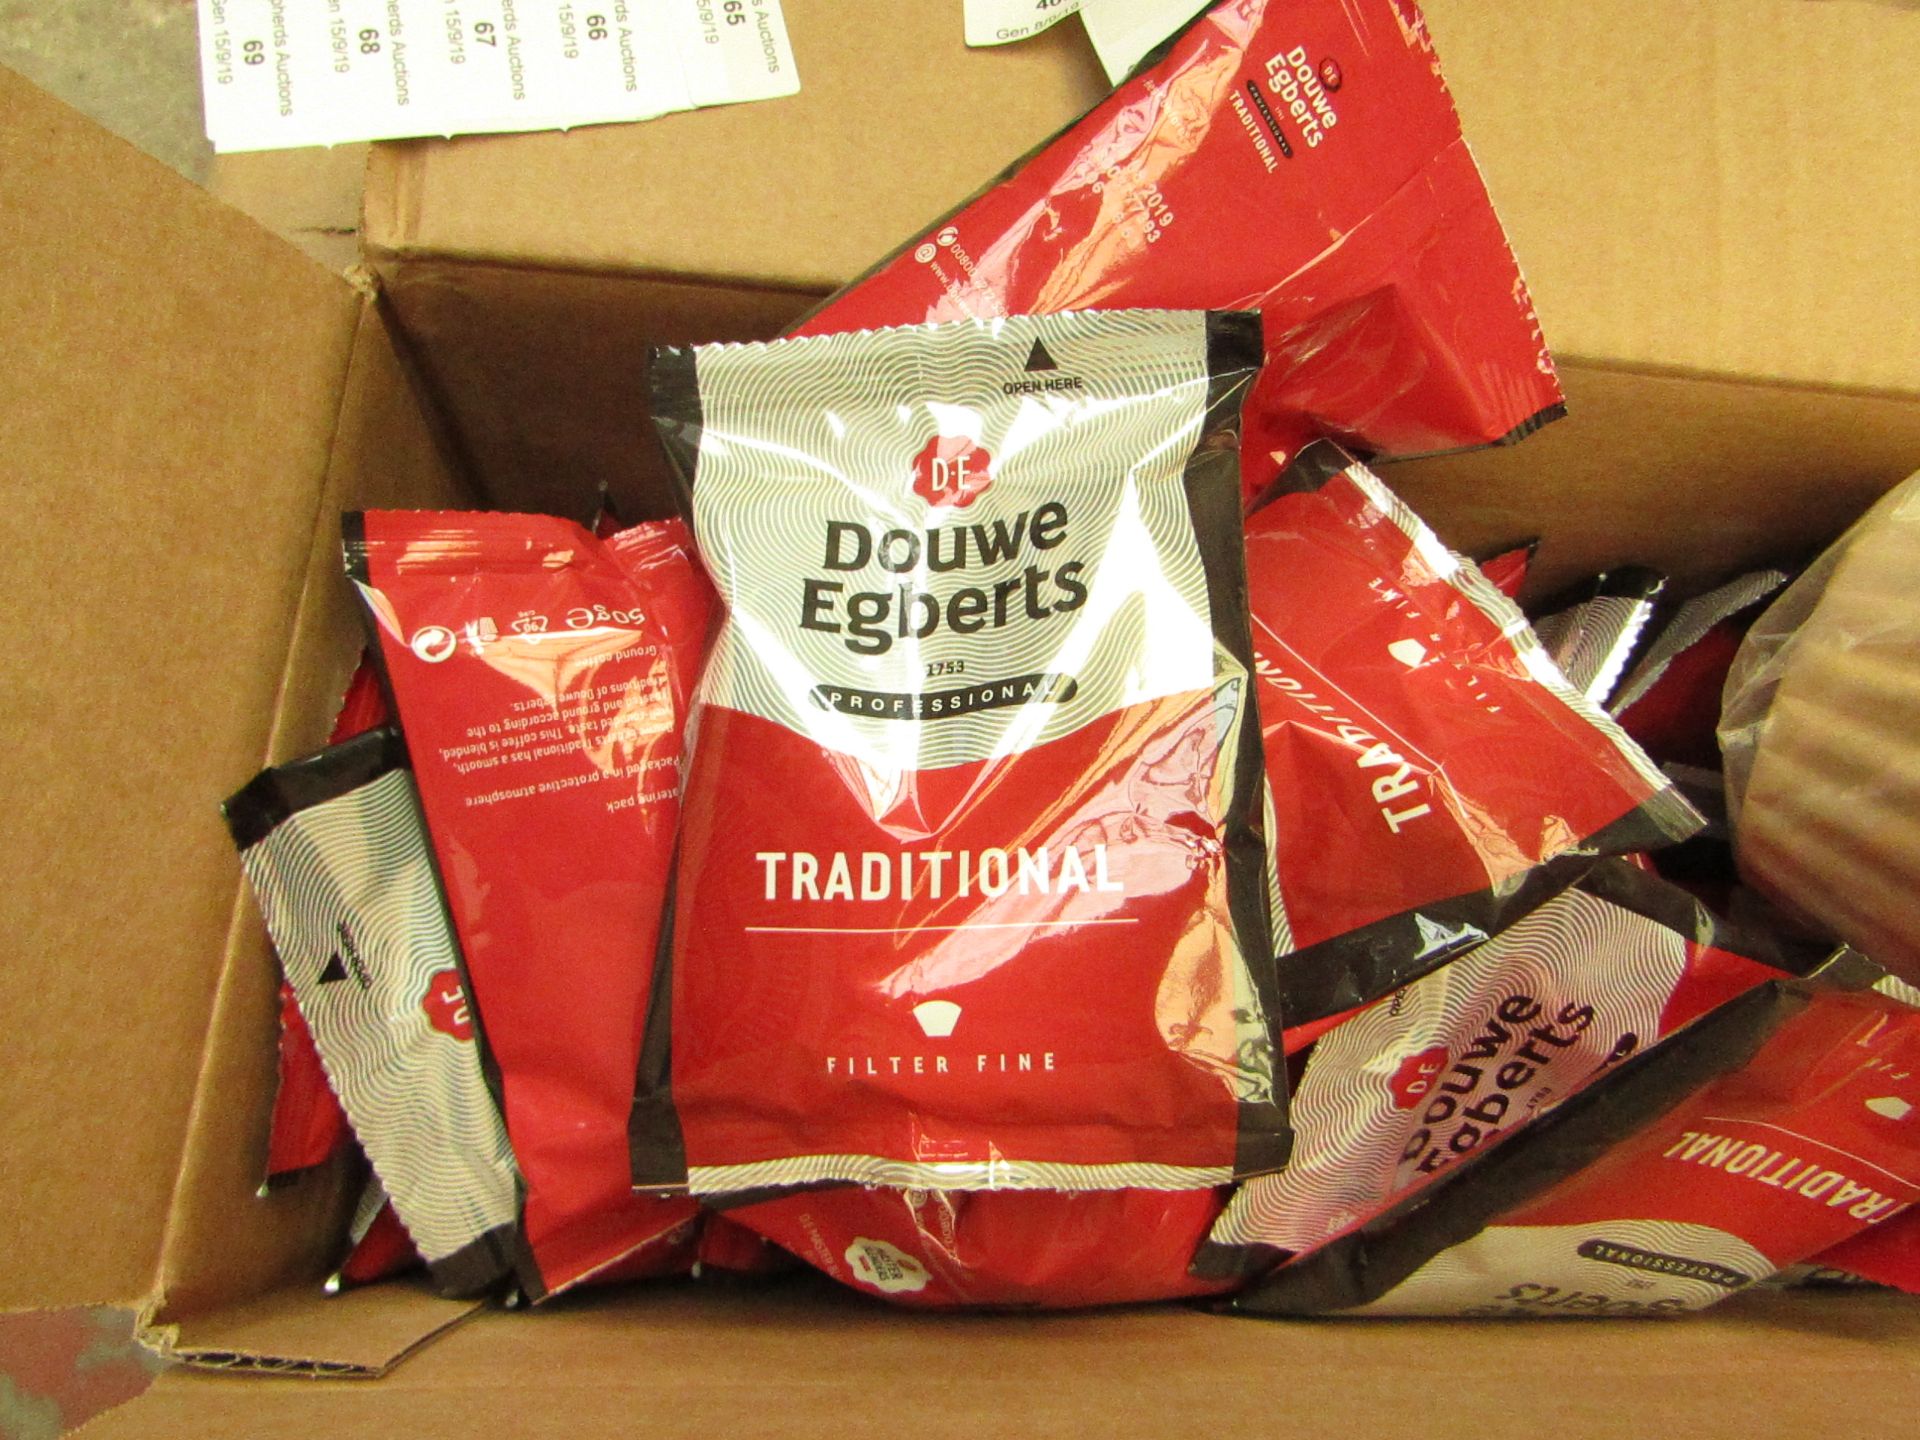 45 x 50g Douge Egberts Coffee pouches with filters included (For filter machines) BB 24/08/19